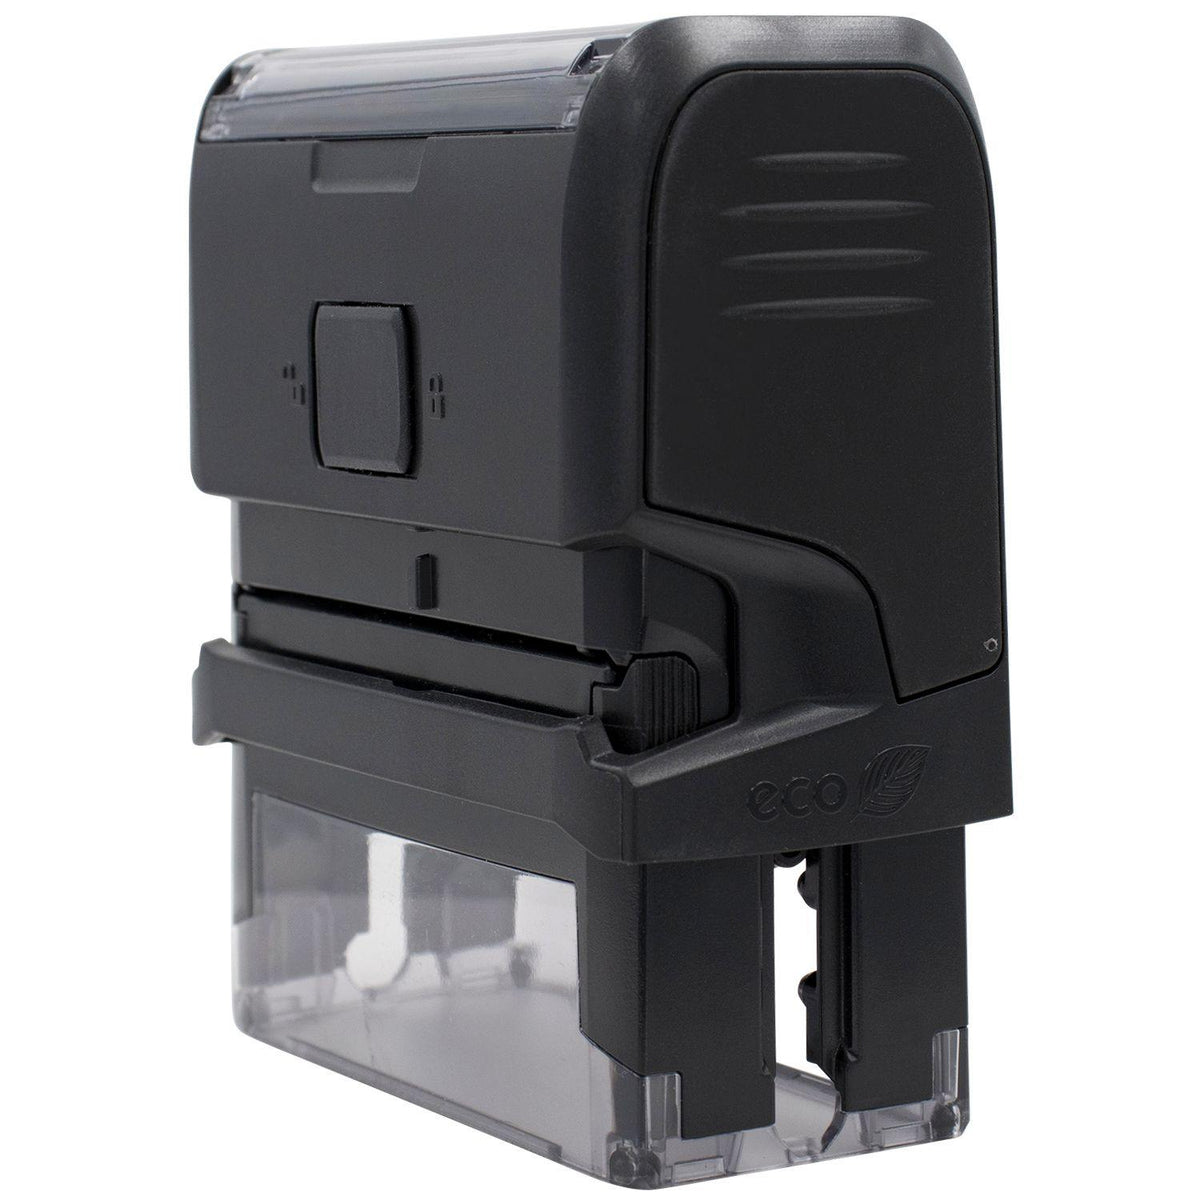 Large Self-Inking Restricted Area Stamp - Engineer Seal Stamps - Brand_Trodat, Impression Size_Large, Stamp Type_Self-Inking Stamp, Type of Use_Business, Type of Use_General, Type of Use_Professional